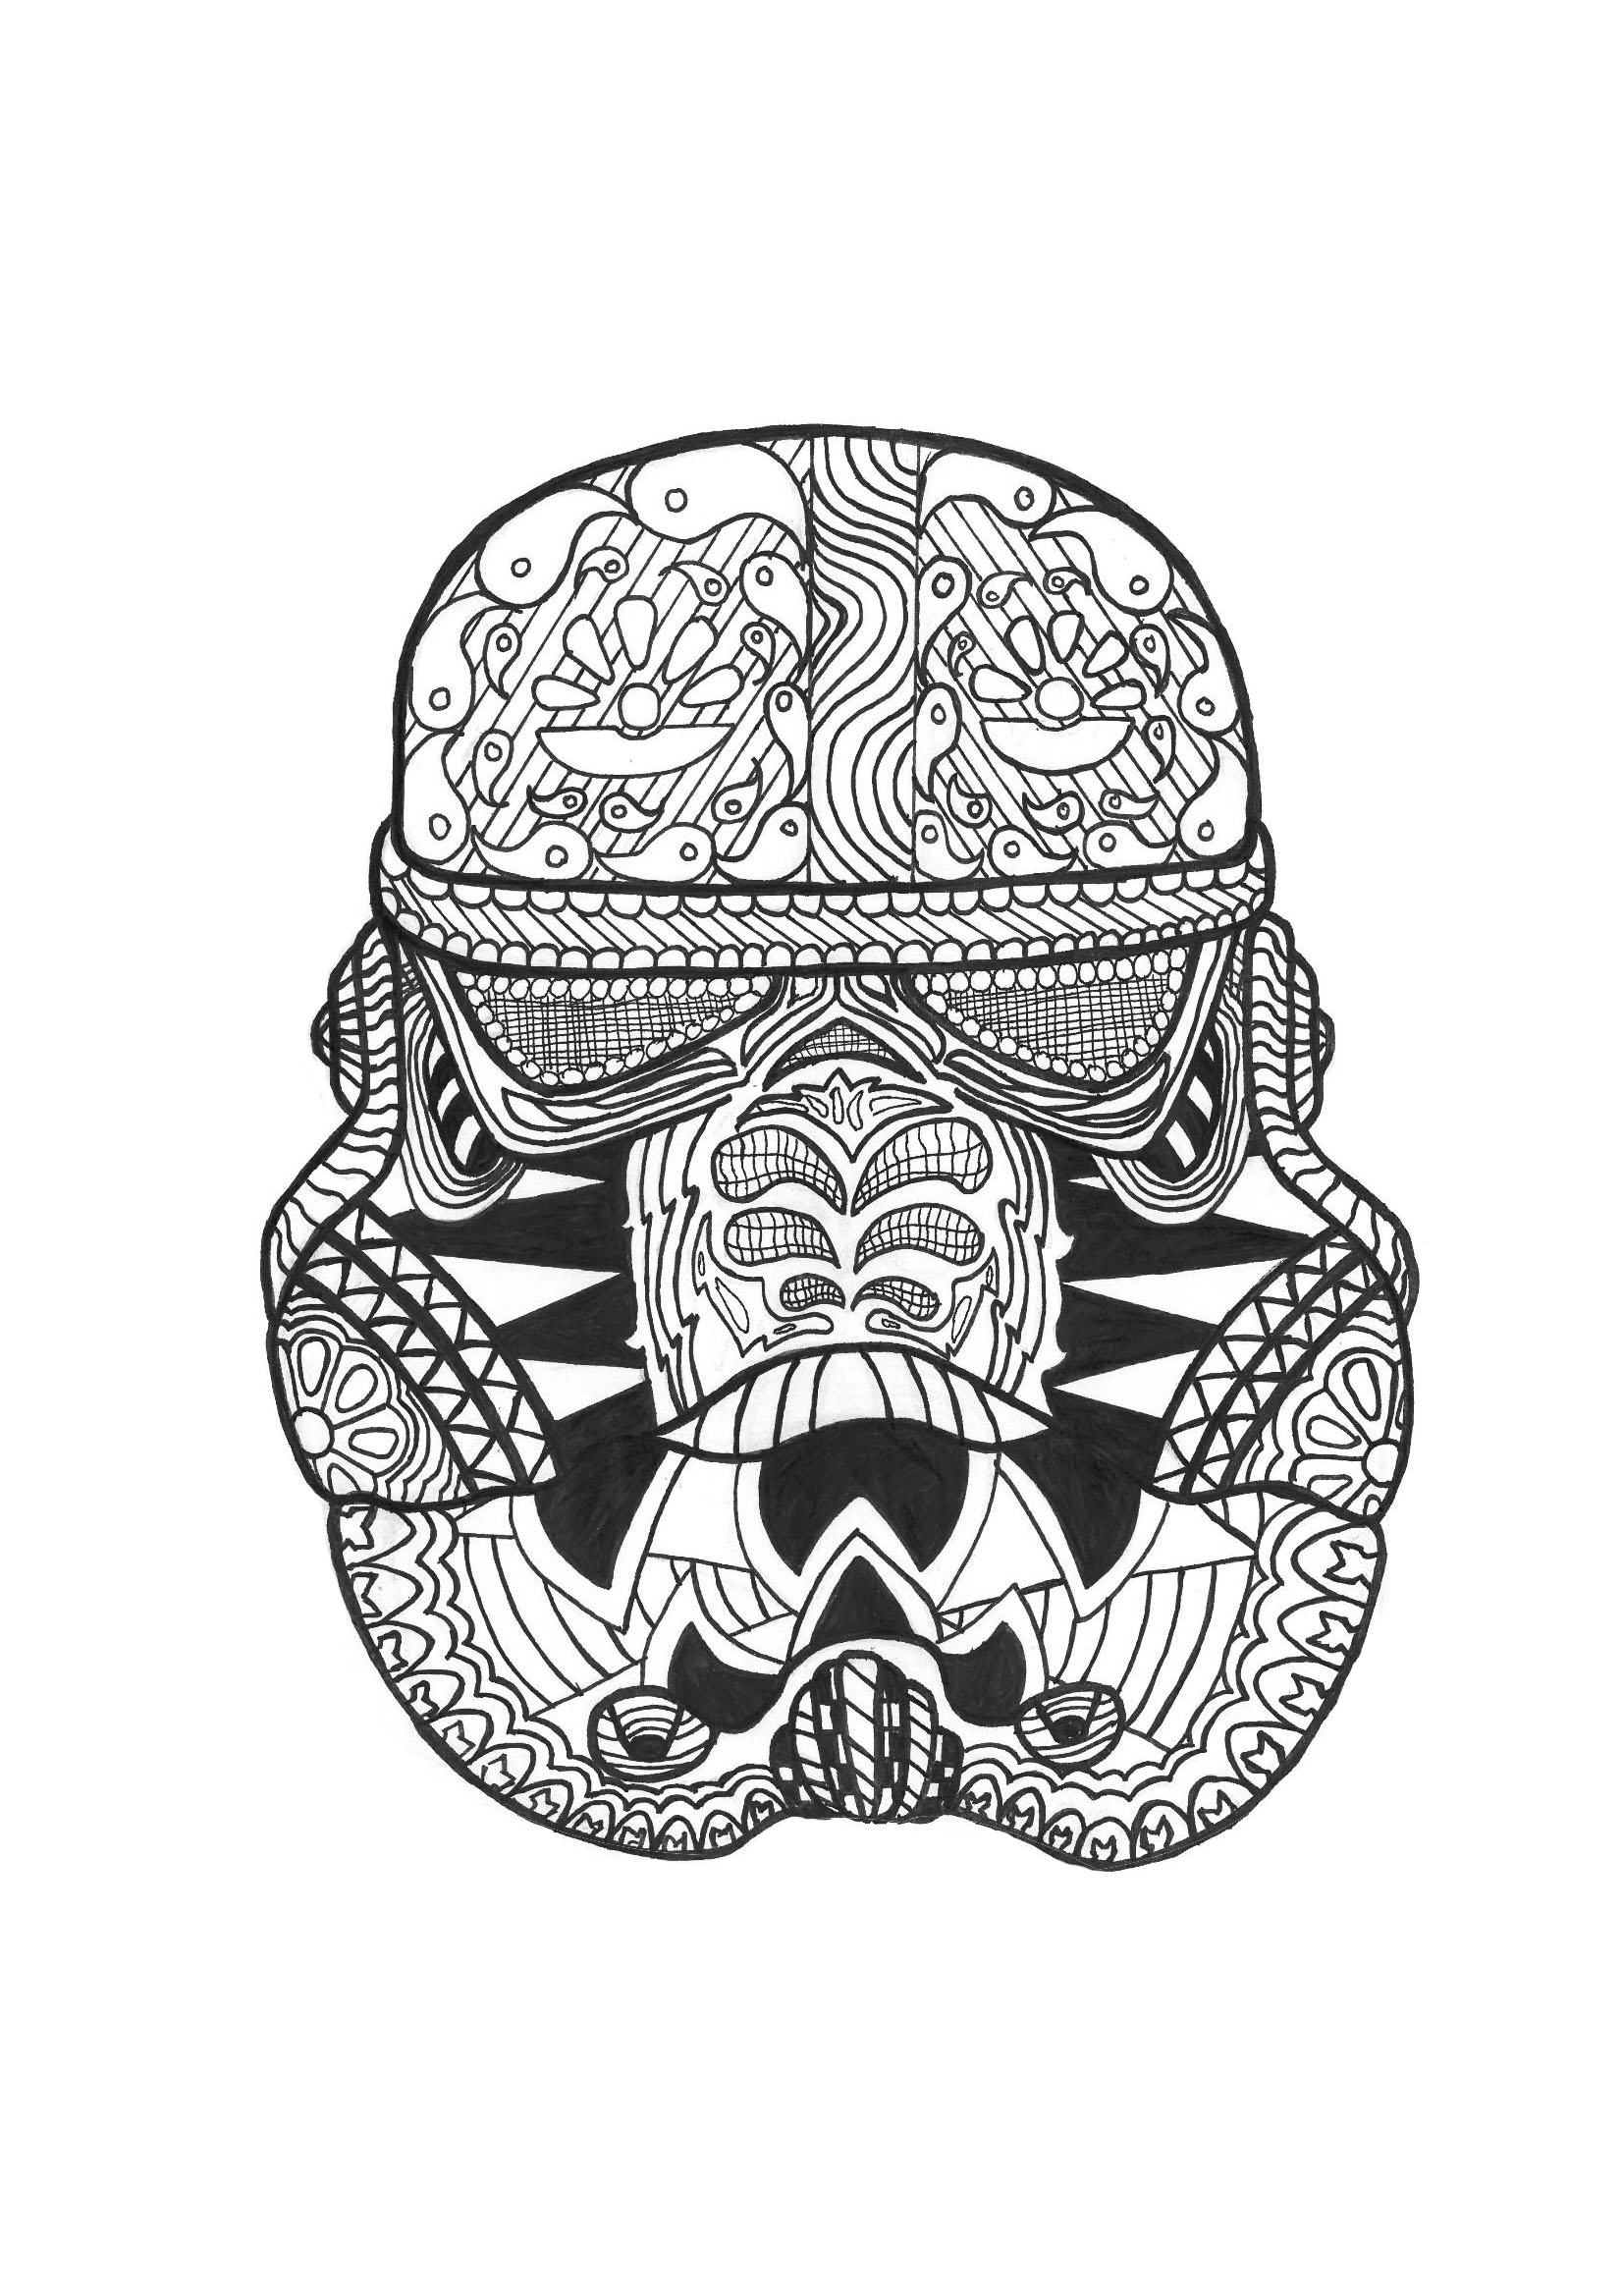 Star Wars Stormtrooper Coloring Pages